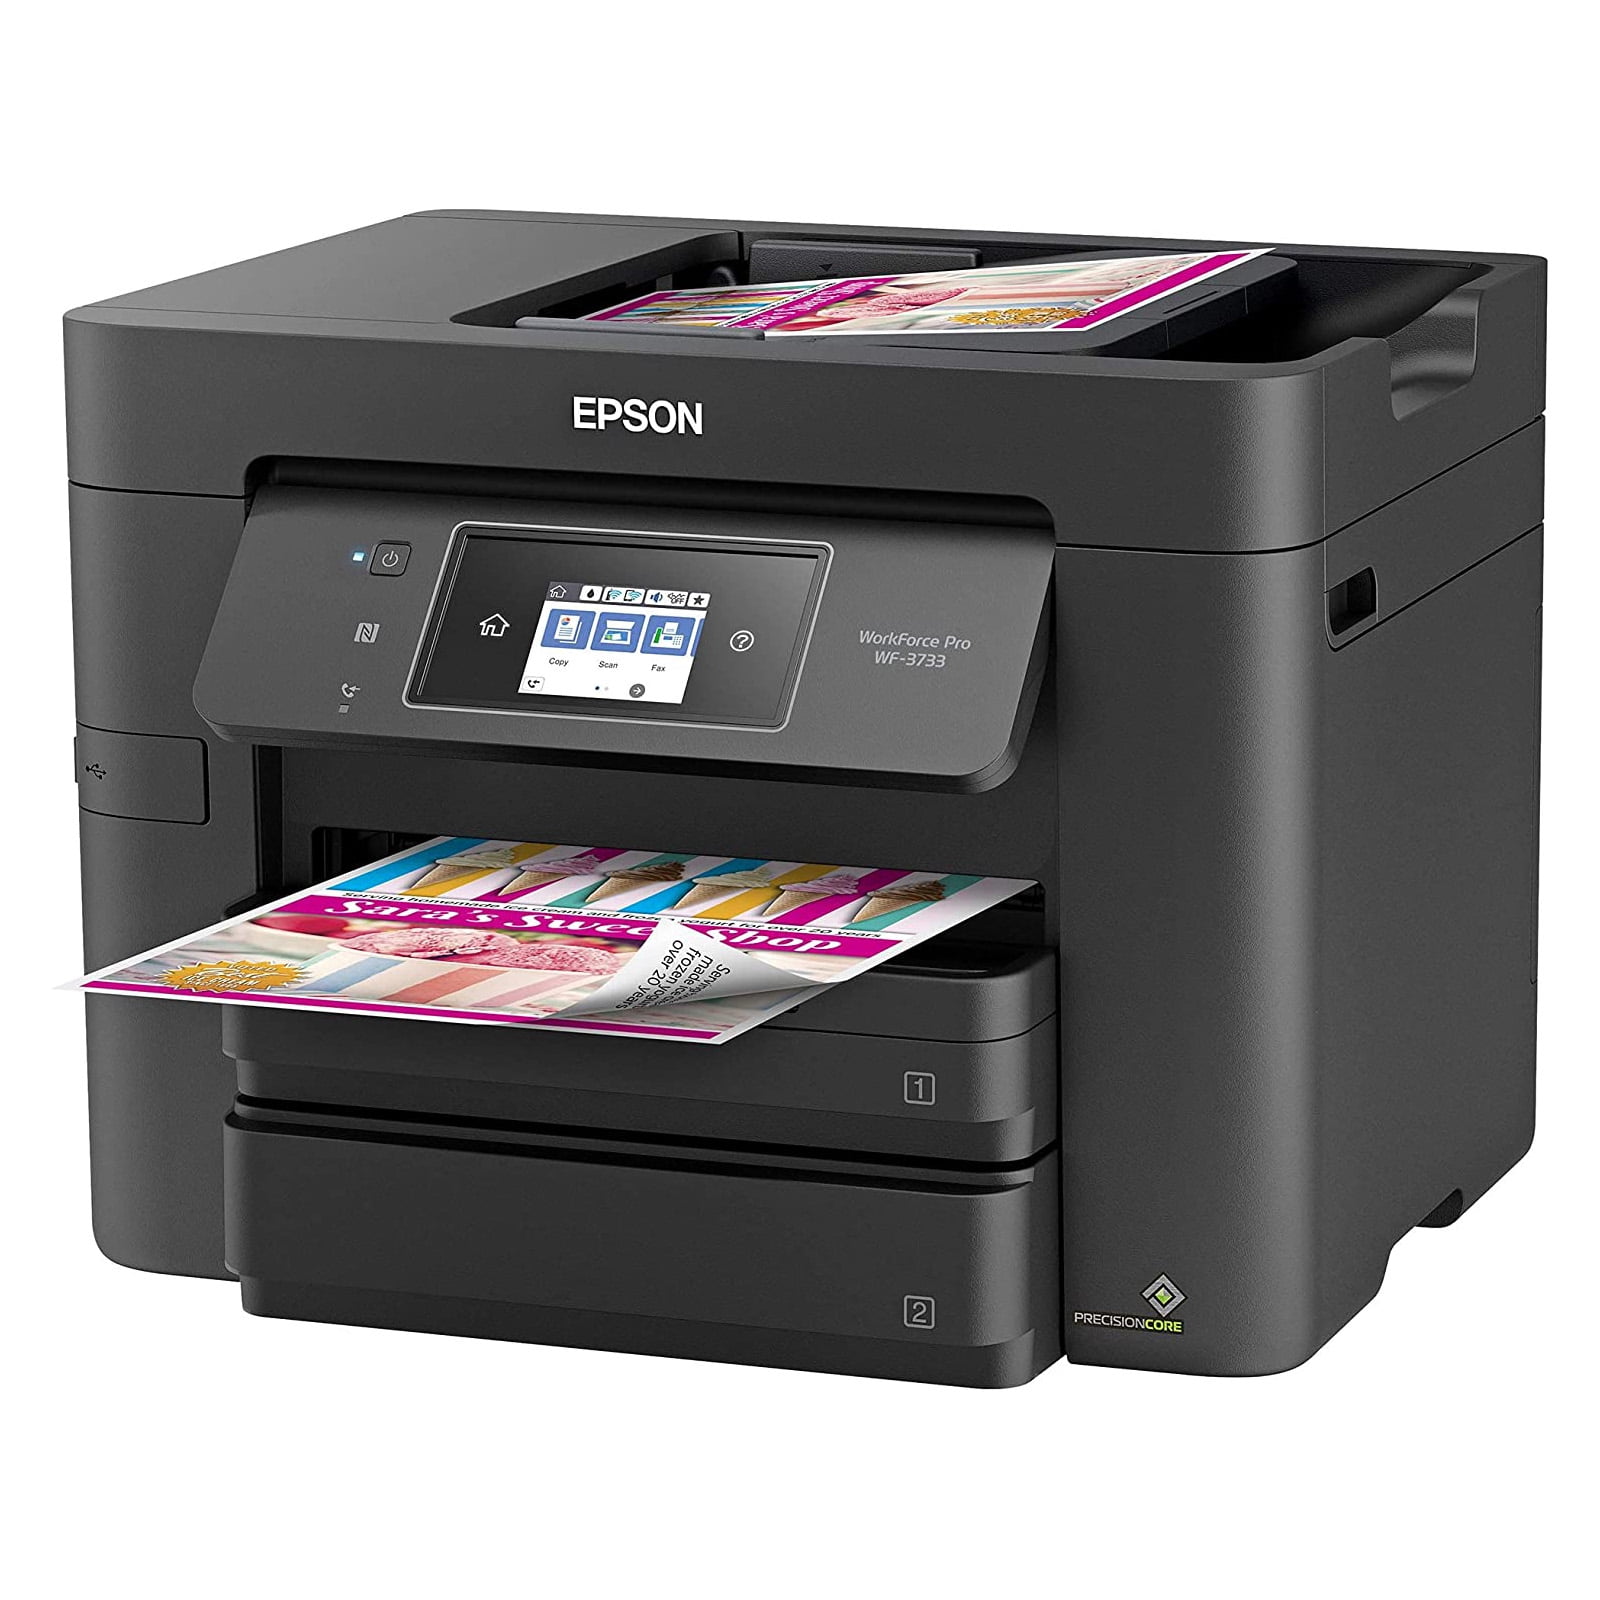 Epson Workforce Pro Wf 3733 Wireless All In One Color Inkjet Printer Home Office Printer 8297